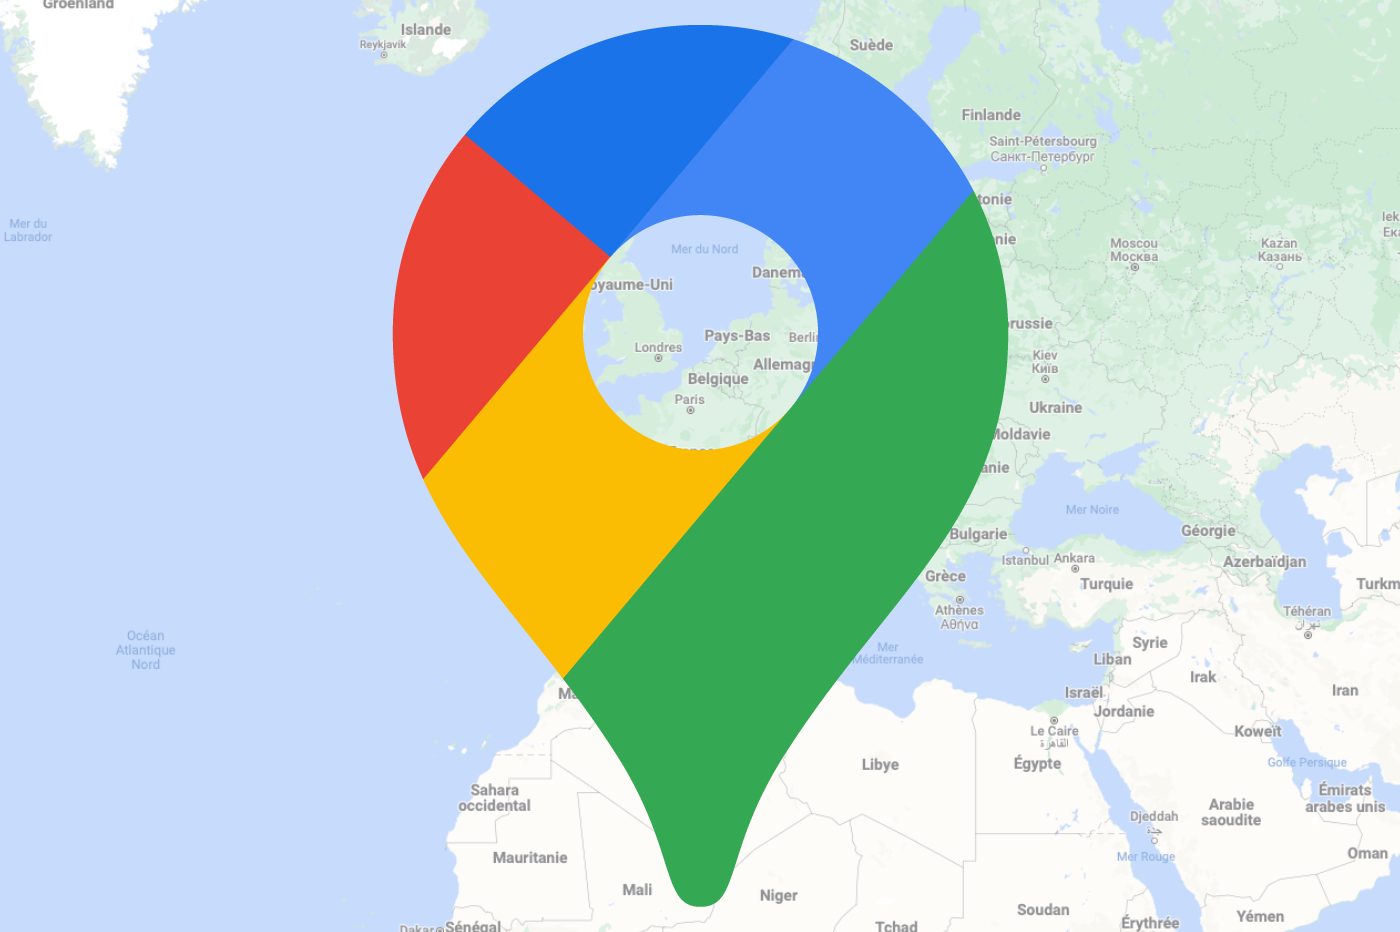 Four years after iOS, Google Maps is adding this functionality to Android